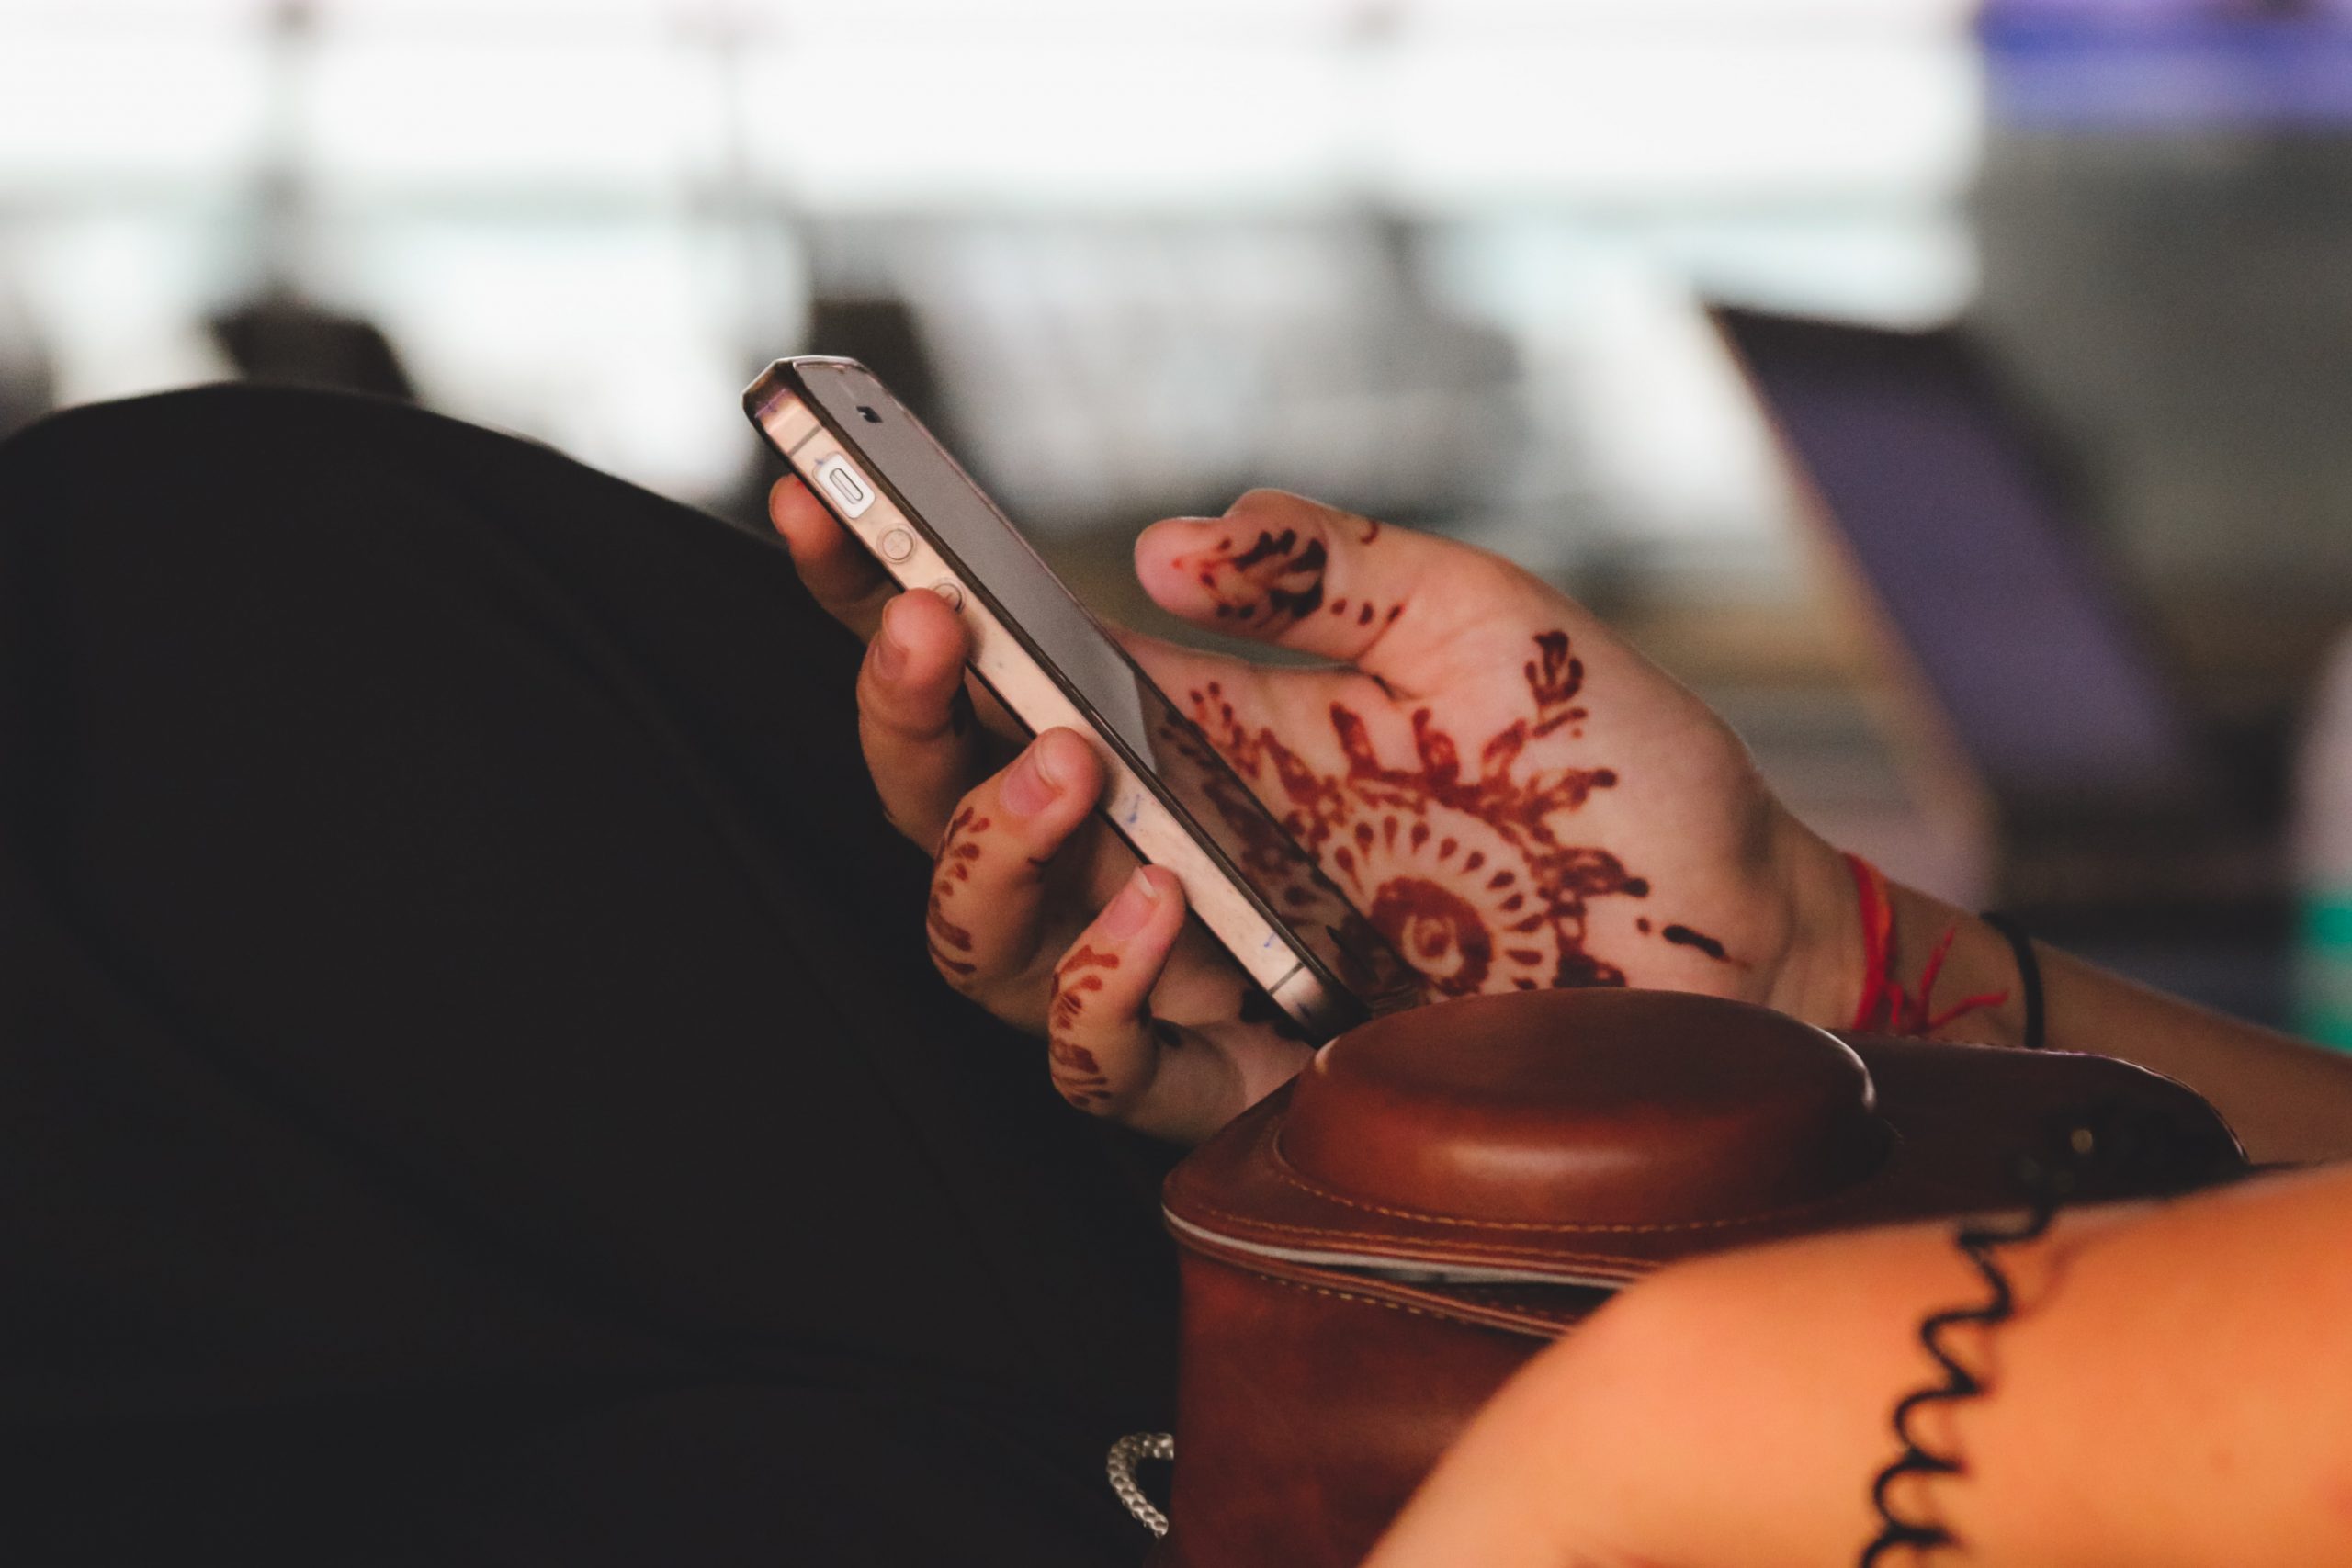 Indian woman's hand with henna holding iphone